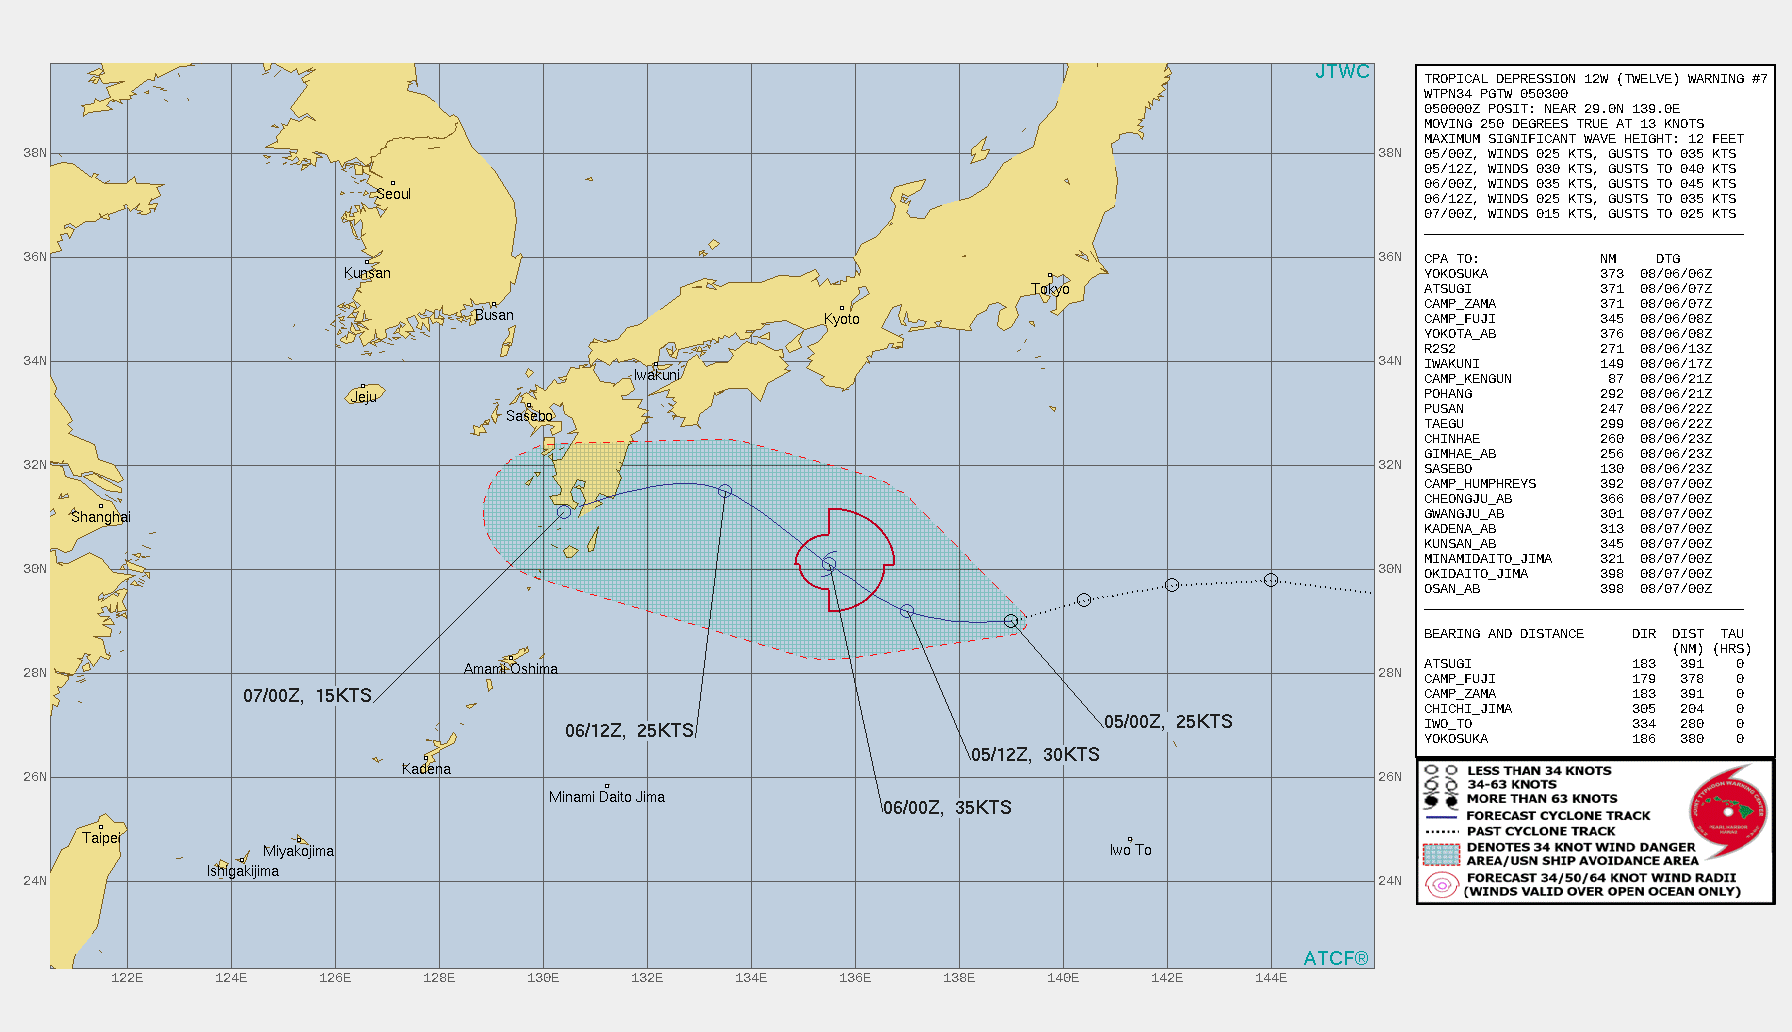 TD 12W. WARNING 7 ISSUED AT 05/03UTC.THERE ARE NO SIGNIFICANT CHANGES TO THE FORECAST FROM THE PREVIOUS WARNING.  FORECAST DISCUSSION: TD 12W WILL CONTINUE TO TRACK GENERALLY WESTWARD THROUGH TAU 12 ALONG THE STEERING RIDGE. AFTER TAU 12, IT WILL APPROACH WITHIN 500NM OF TD 14W, COMMENCE FUJIWHARA INTERACTION AND STEER ALONG THE OUTER PERIPHERY OF TD 14W. TD 12W WILL INTENSIFY TO A PEAK INTENSITY OF 35 KNOTS BY TAU 24 UNDER MARGINALLY FAVORABLE CONDITIONS. AFTER TAU 24, TD 12W WILL ACCELERATE AROUND THE NORTHERN PERIPHERY OF TD 14W APPROACHING WITHIN 300NM BY TAU 36. TD 12W WILL DISSIPATE BY TAU 48 AS IT BECOMES ABSORBED INTO TD 14W, WHICH IS FORECAST TO REMAIN THE STRONGER, DOMINANT SYSTEM.